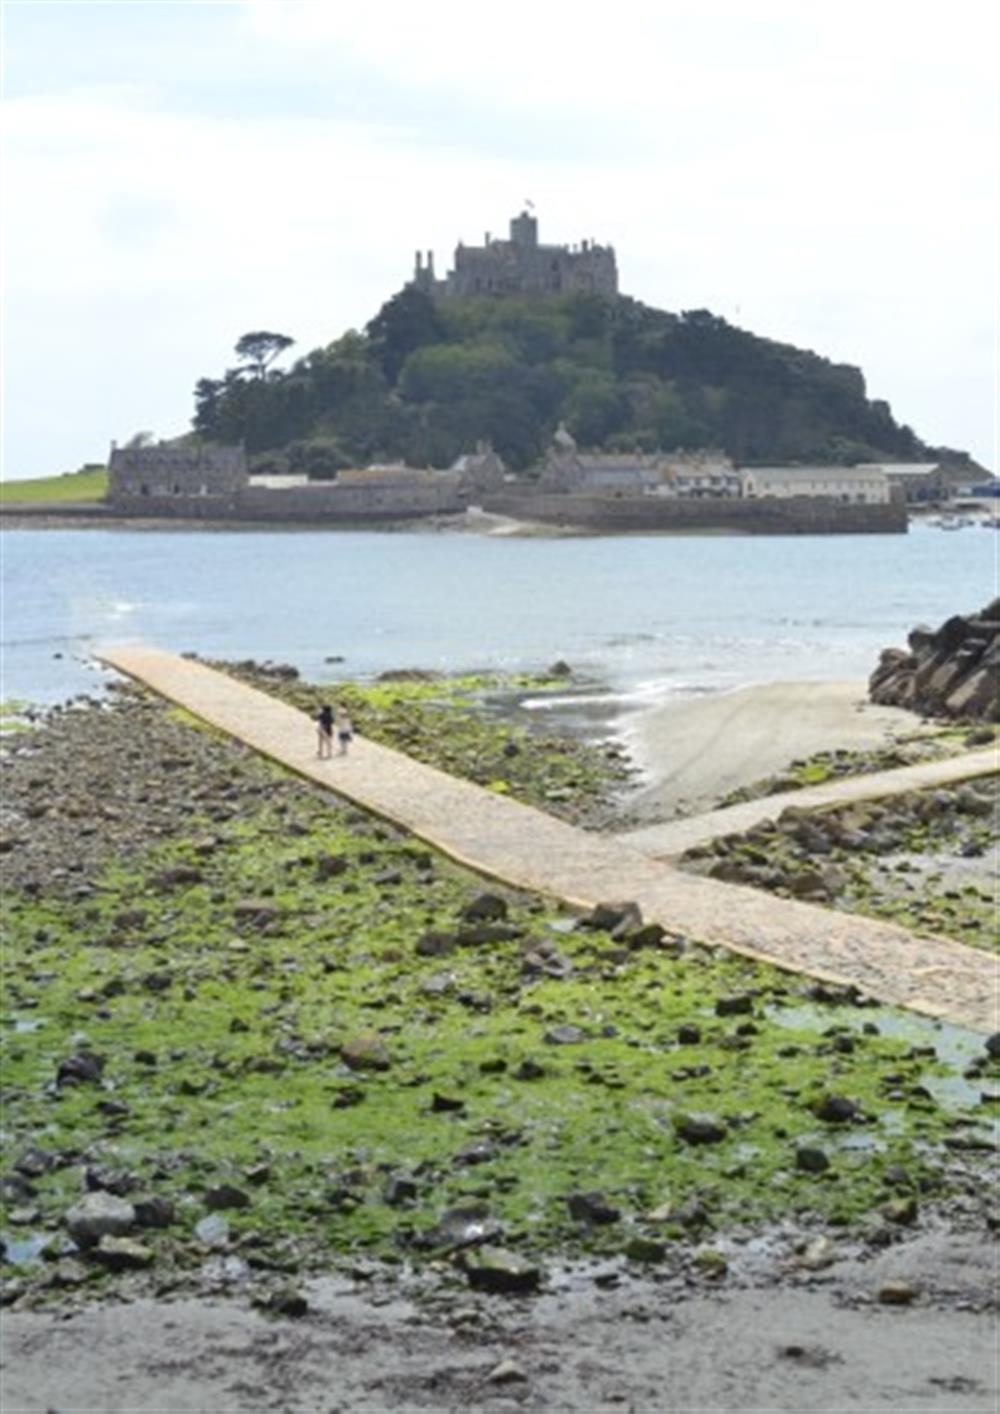 St Michael's Mount is 45 minutes' away - cross the causeway by foot or catch the water-taxi across to the island